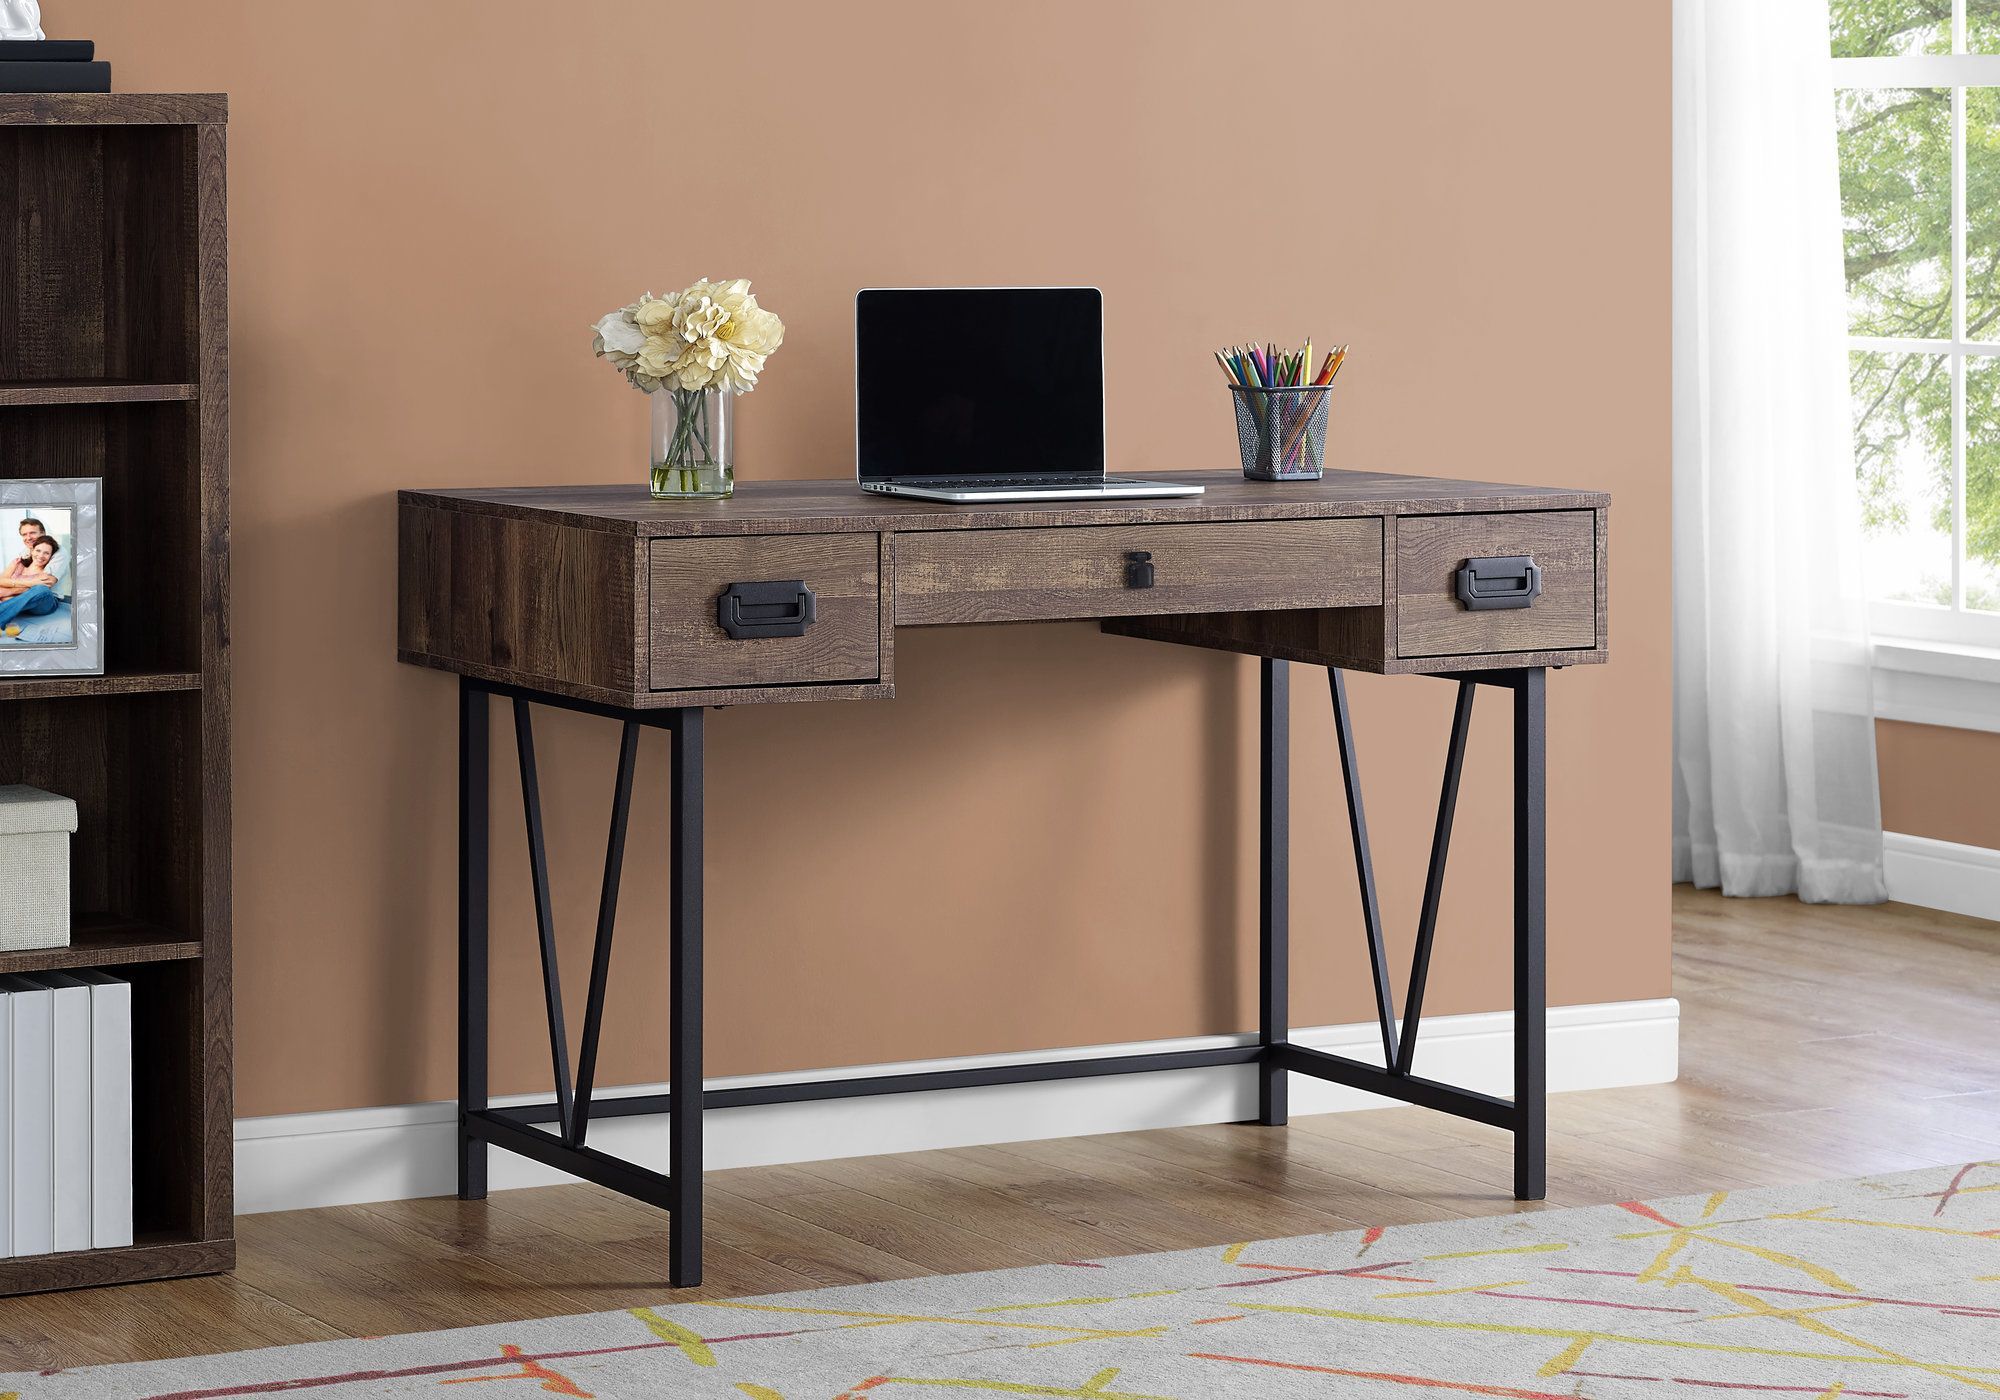 Office Desks : Optimize your space in a stylish way